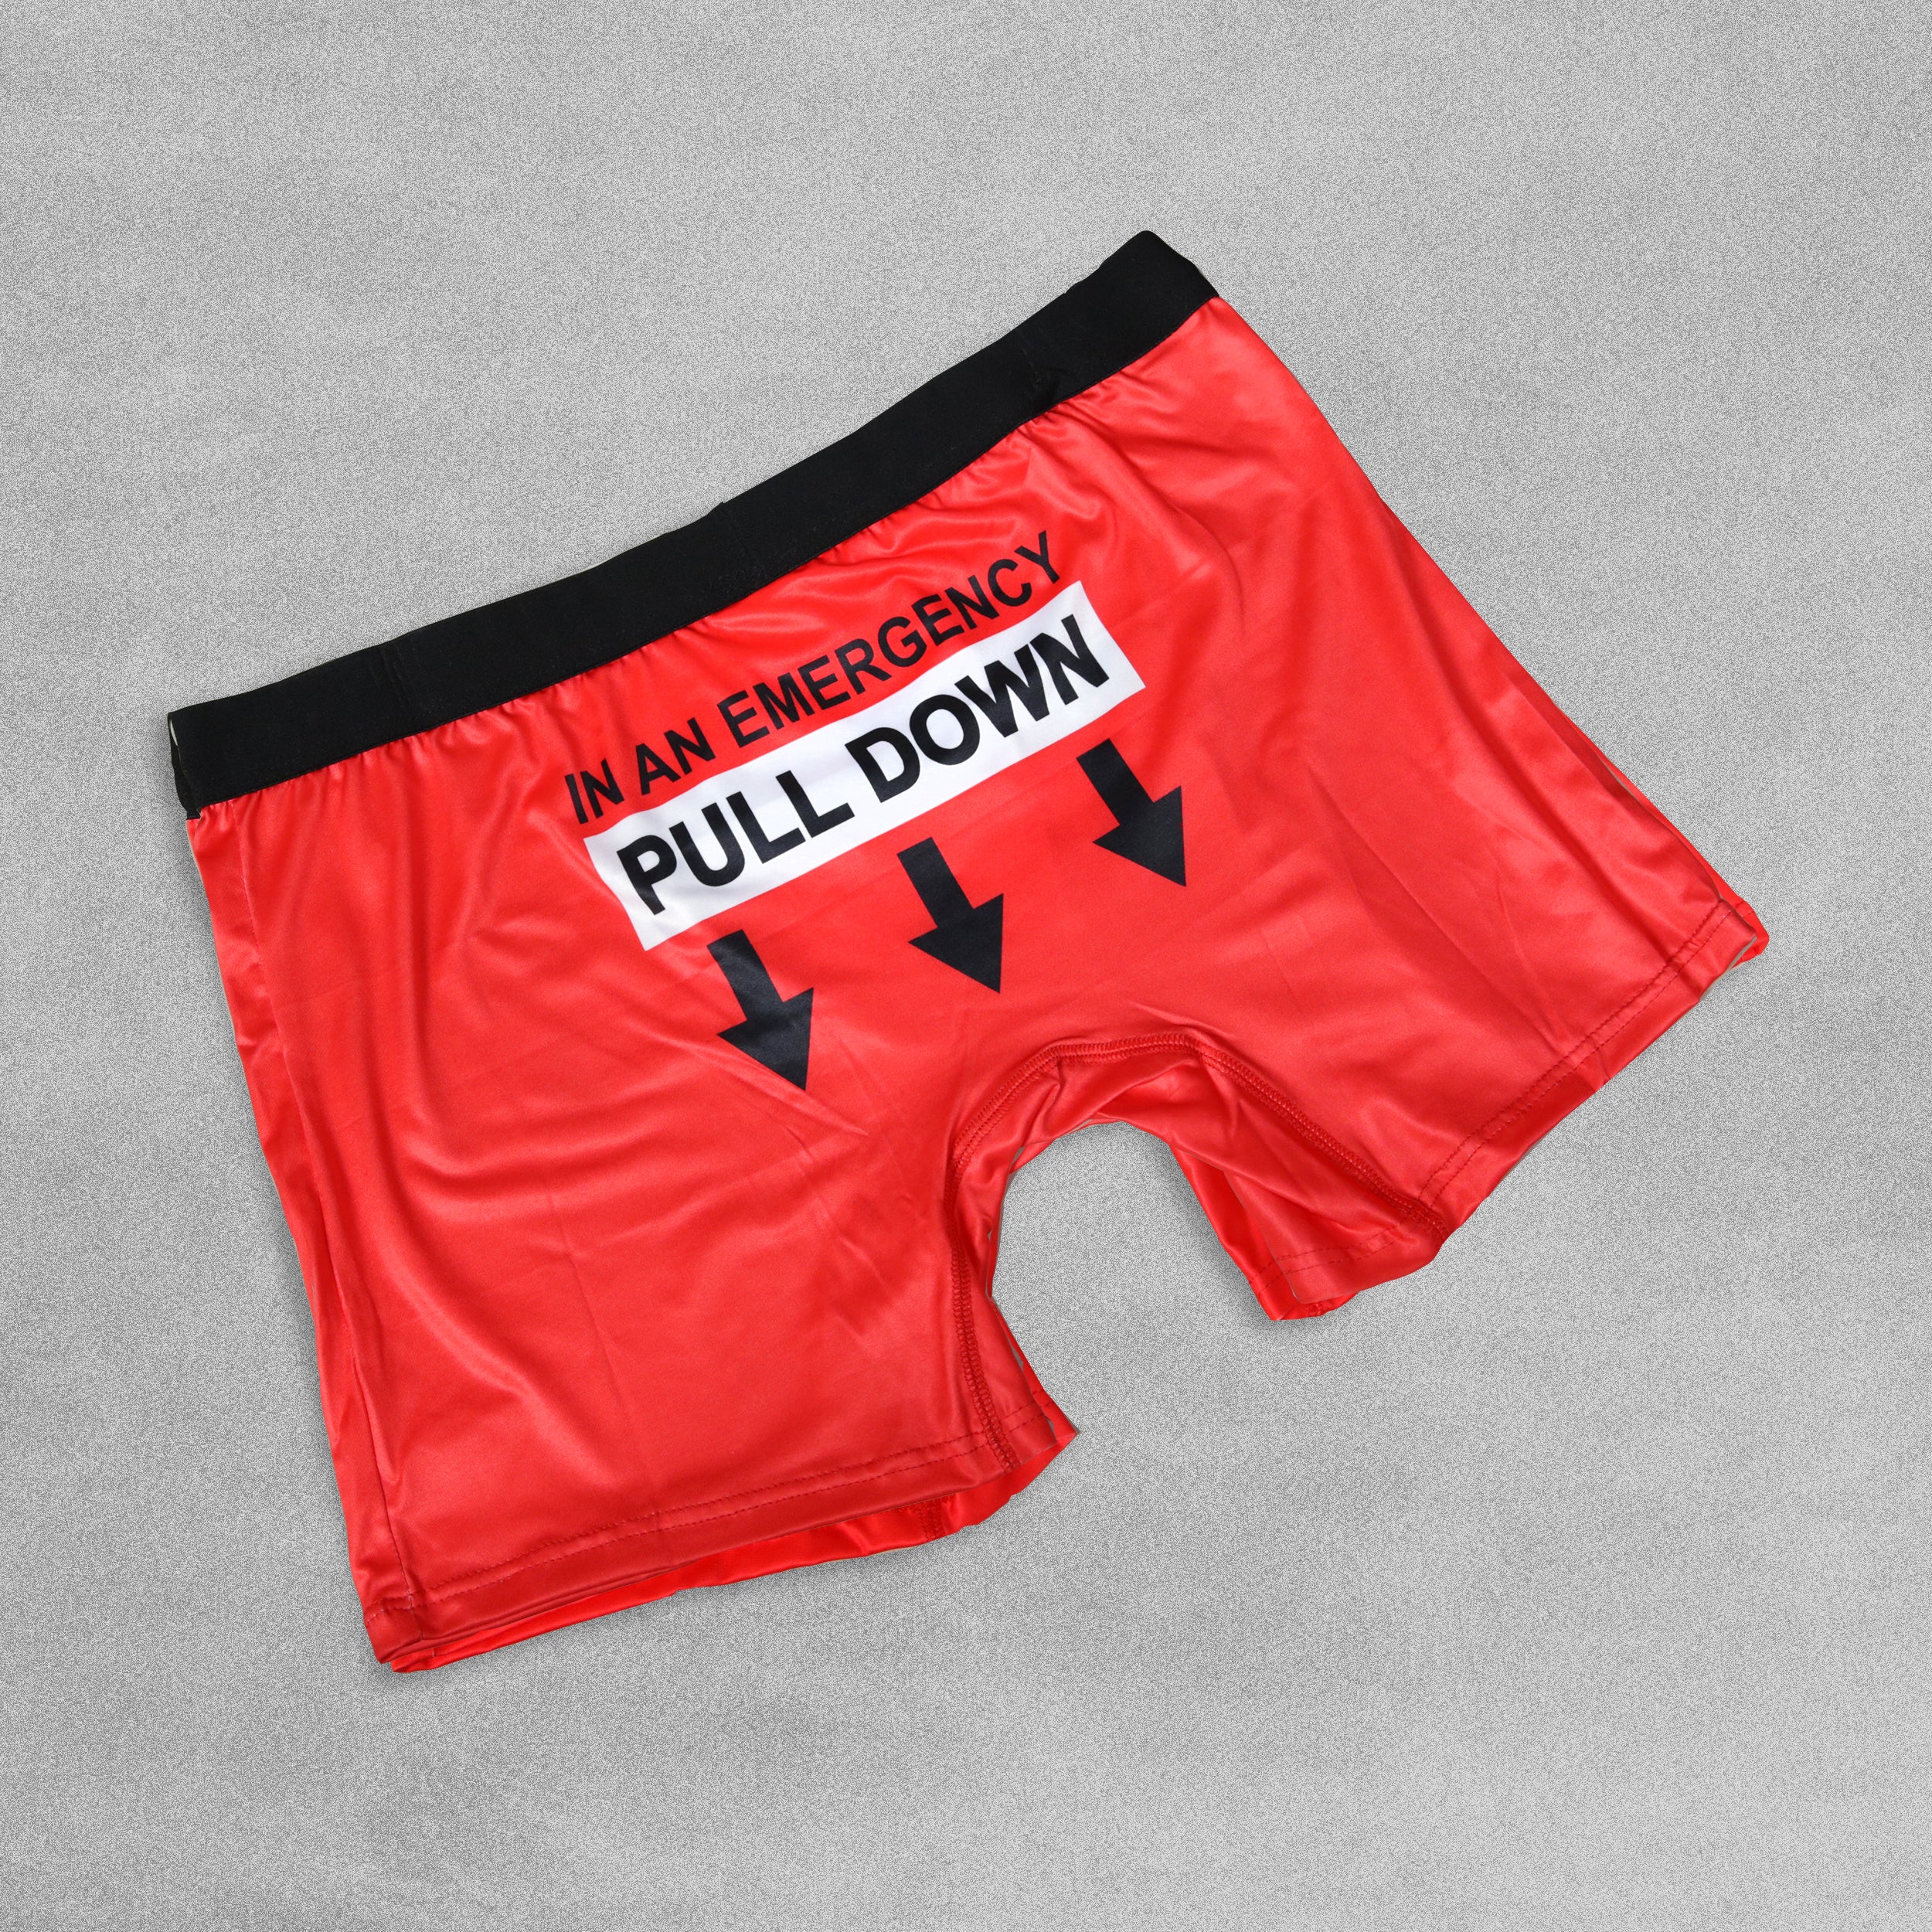 Mens Novelty Boxer Shorts - In An Emergency Pull Down!